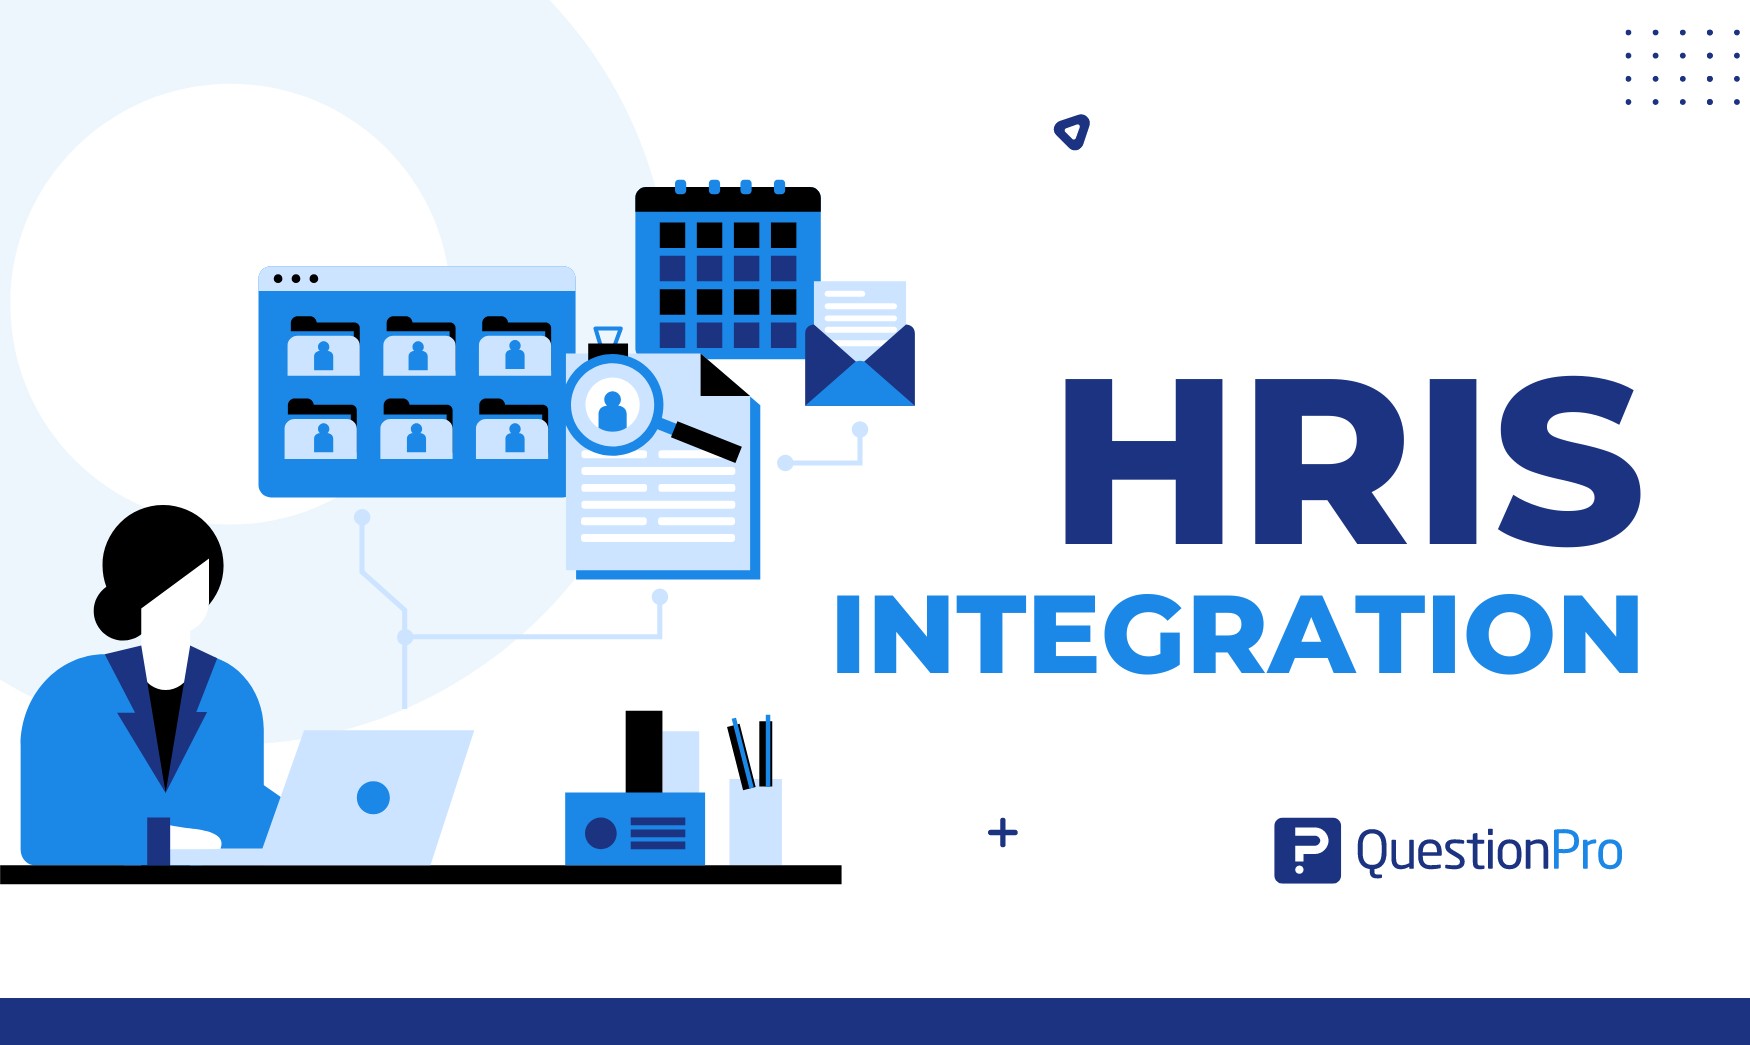 HRIS Integration: What it is, Benefits & How to Approach It?